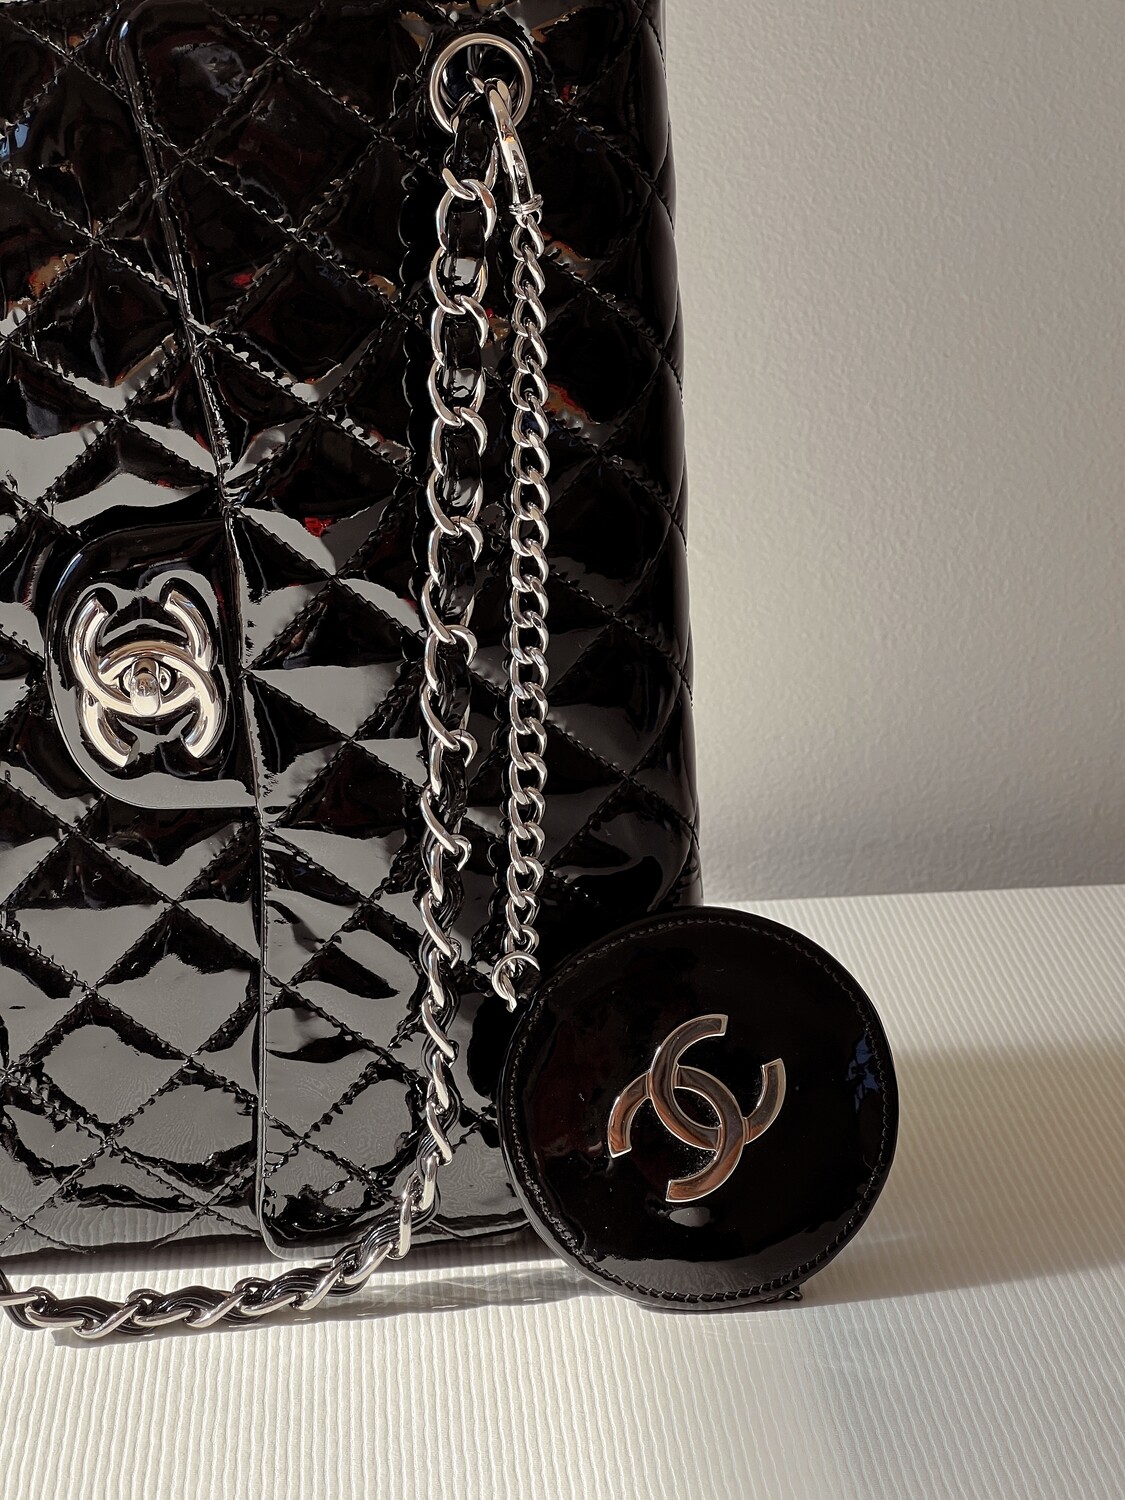 CHANEL CC PATENT LEATHER LARGE MIRROR BAG CHARM